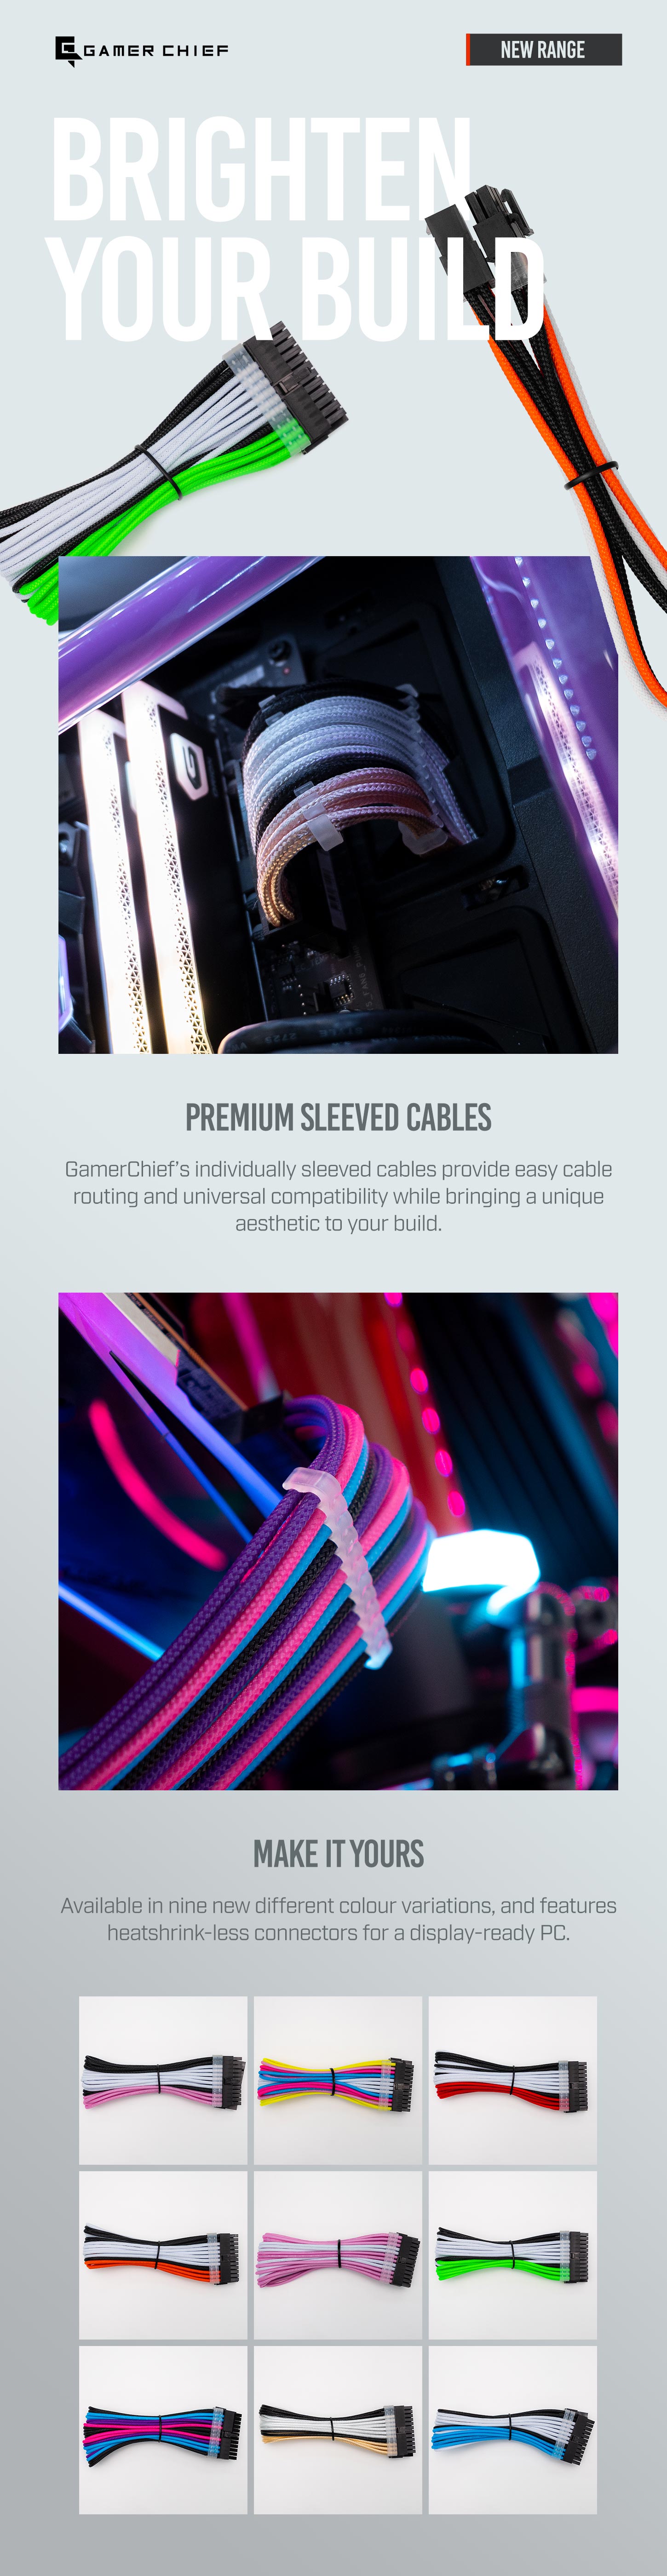 A large marketing image providing additional information about the product GamerChief Elite Series 8-Pin PCIe 30cm Sleeved Extension Cable (Blue/White/Black) - Additional alt info not provided